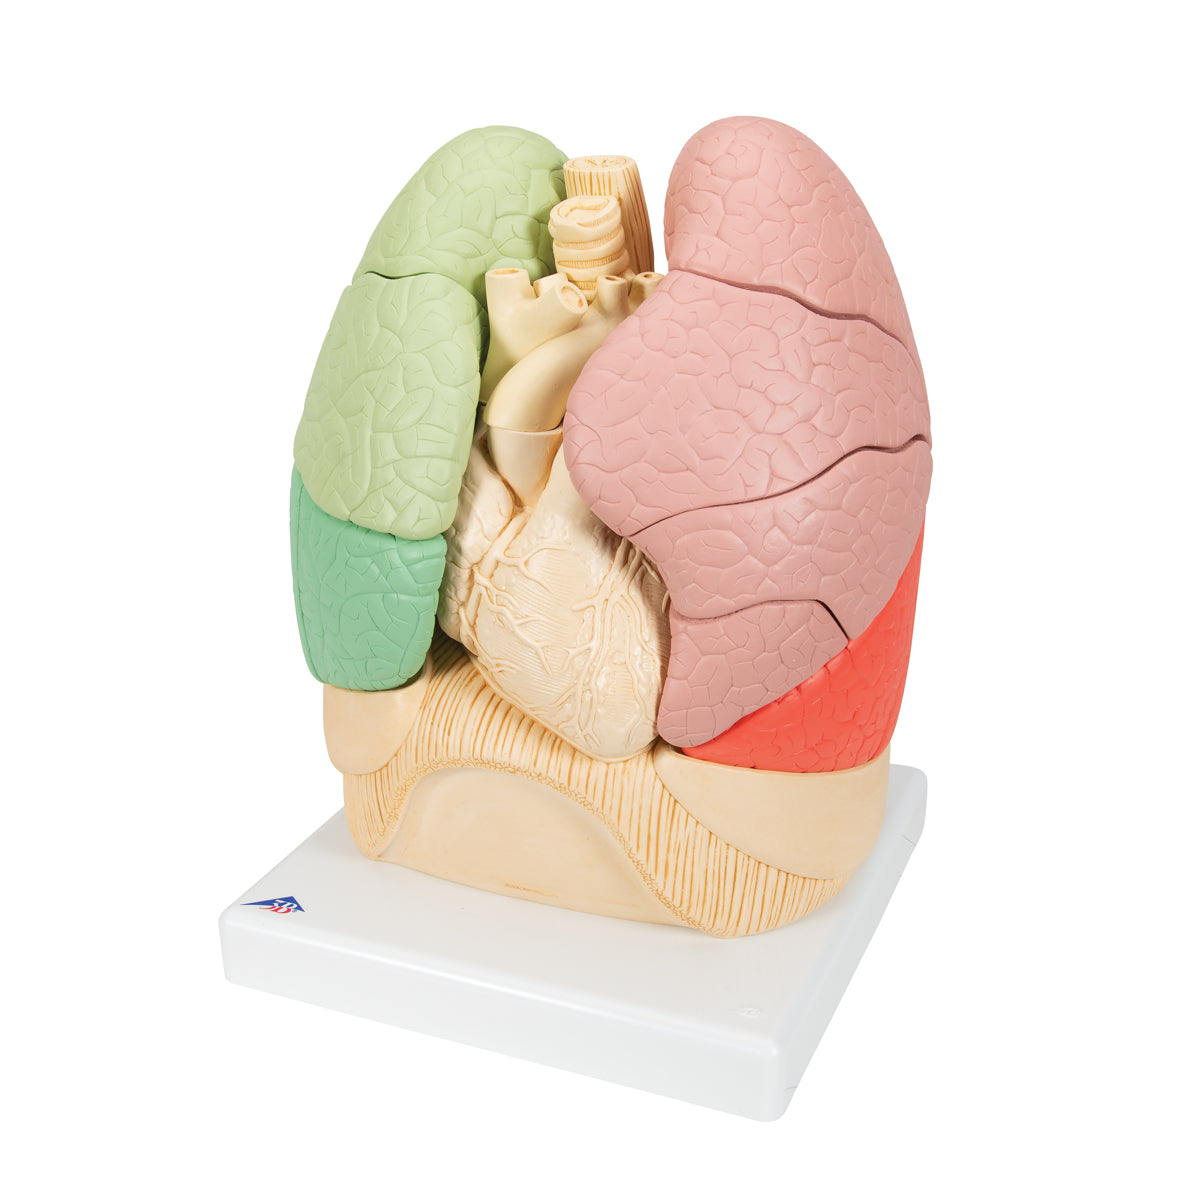 Lung model with heart and bronchi, divided into segments